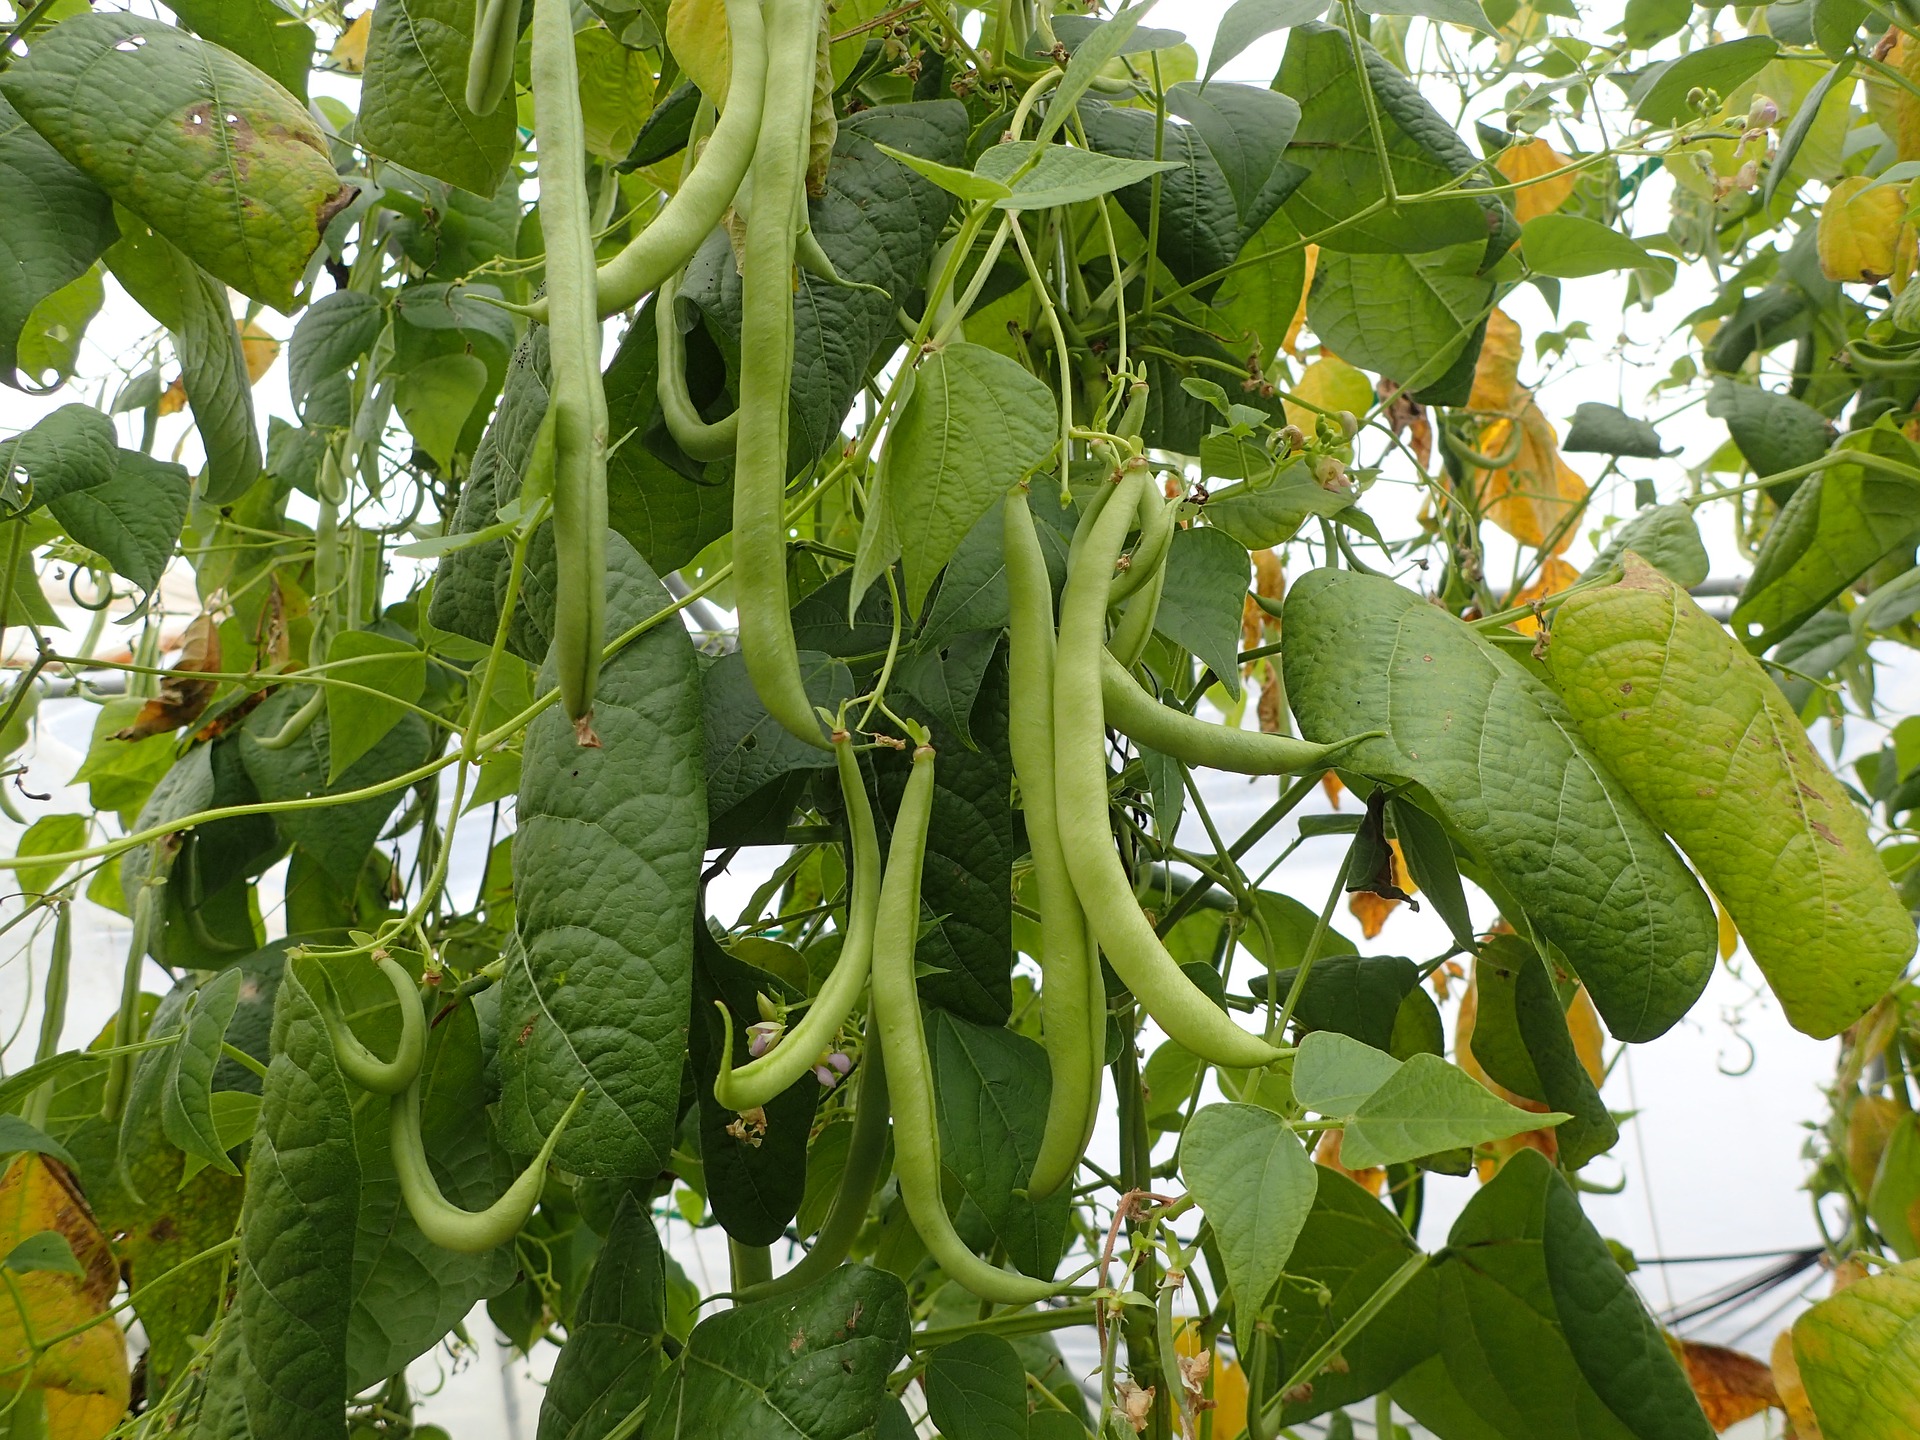 Beans: Planting, Growing, and Harvesting Bean Plants | The Old ...